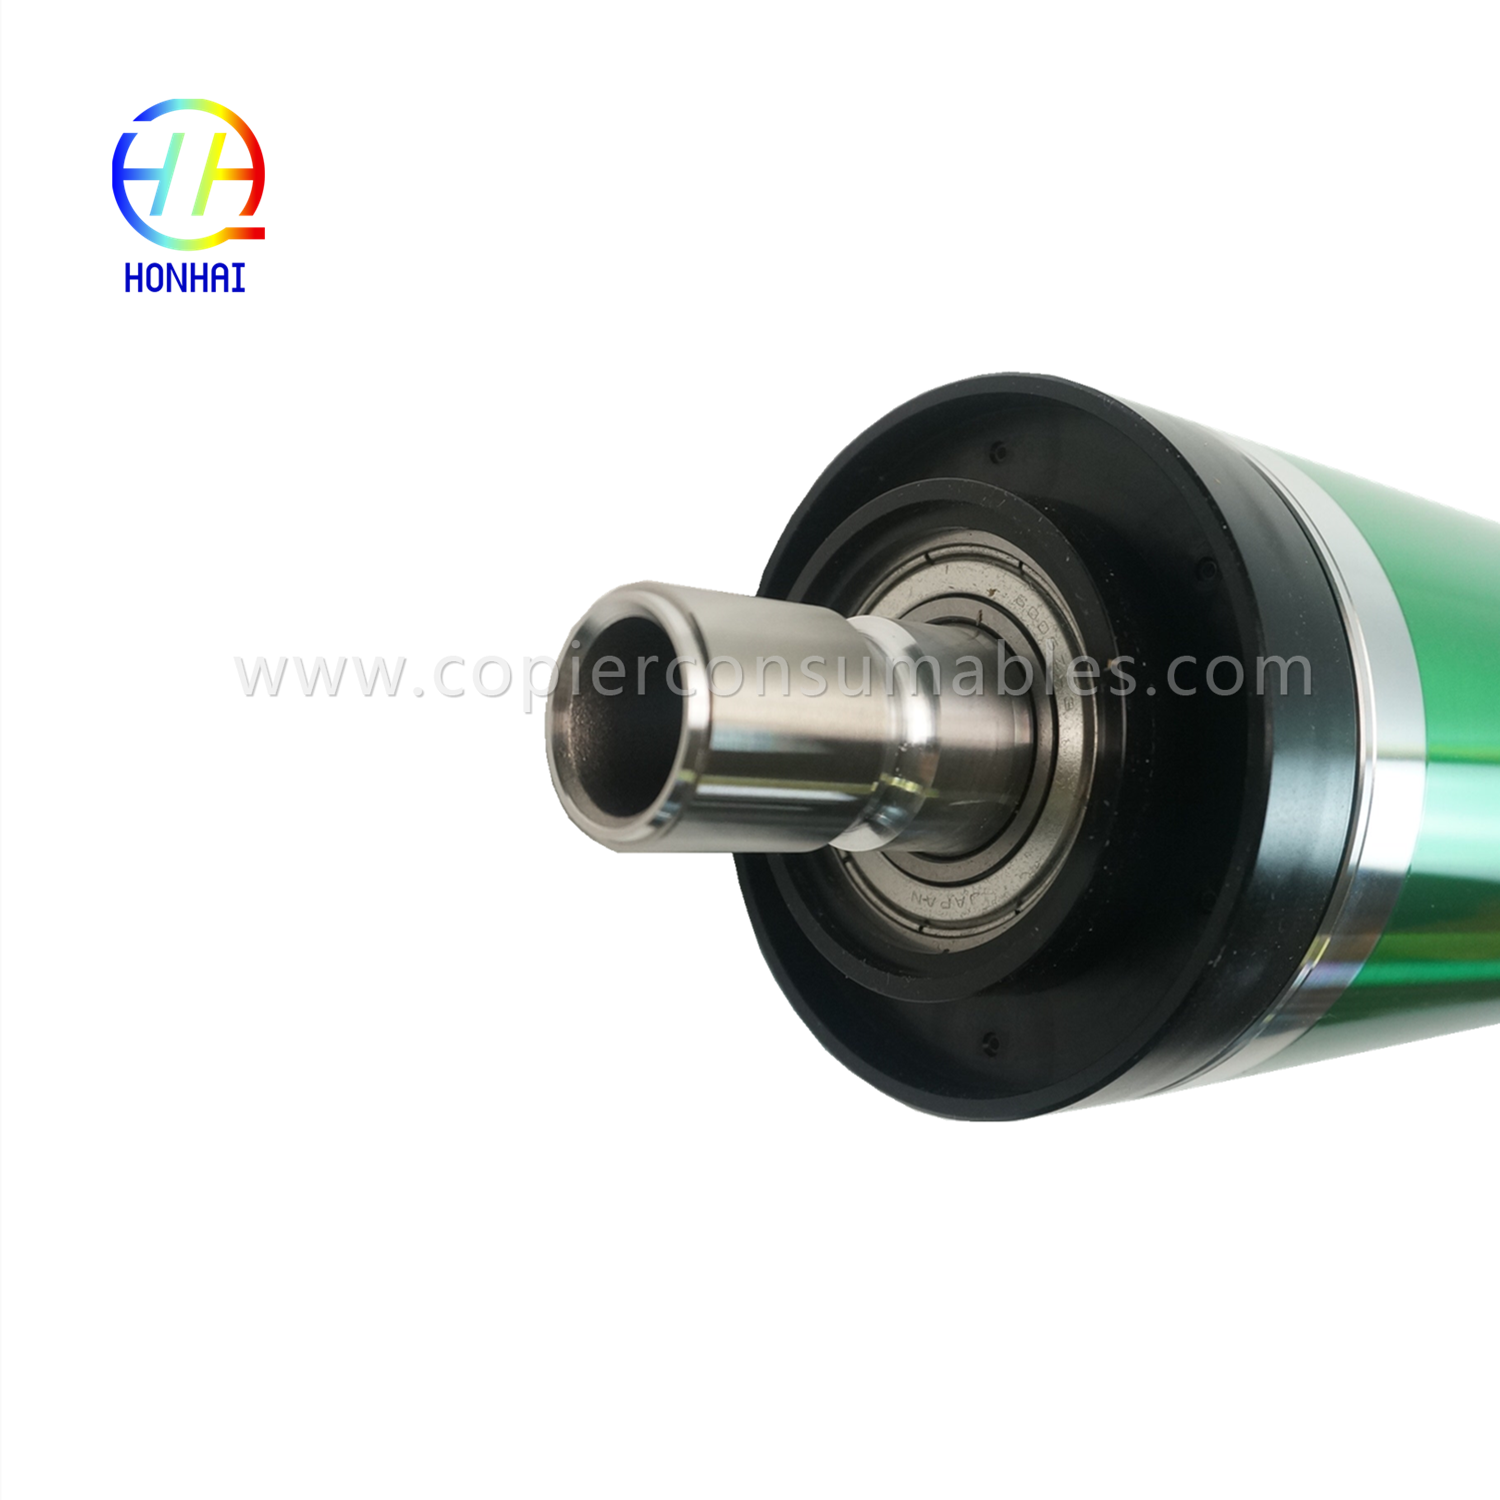 OPC Drum for OCE 9300 9400 9600 TDS300 400 600 700 Pw300 340 360 365 1060009321 China